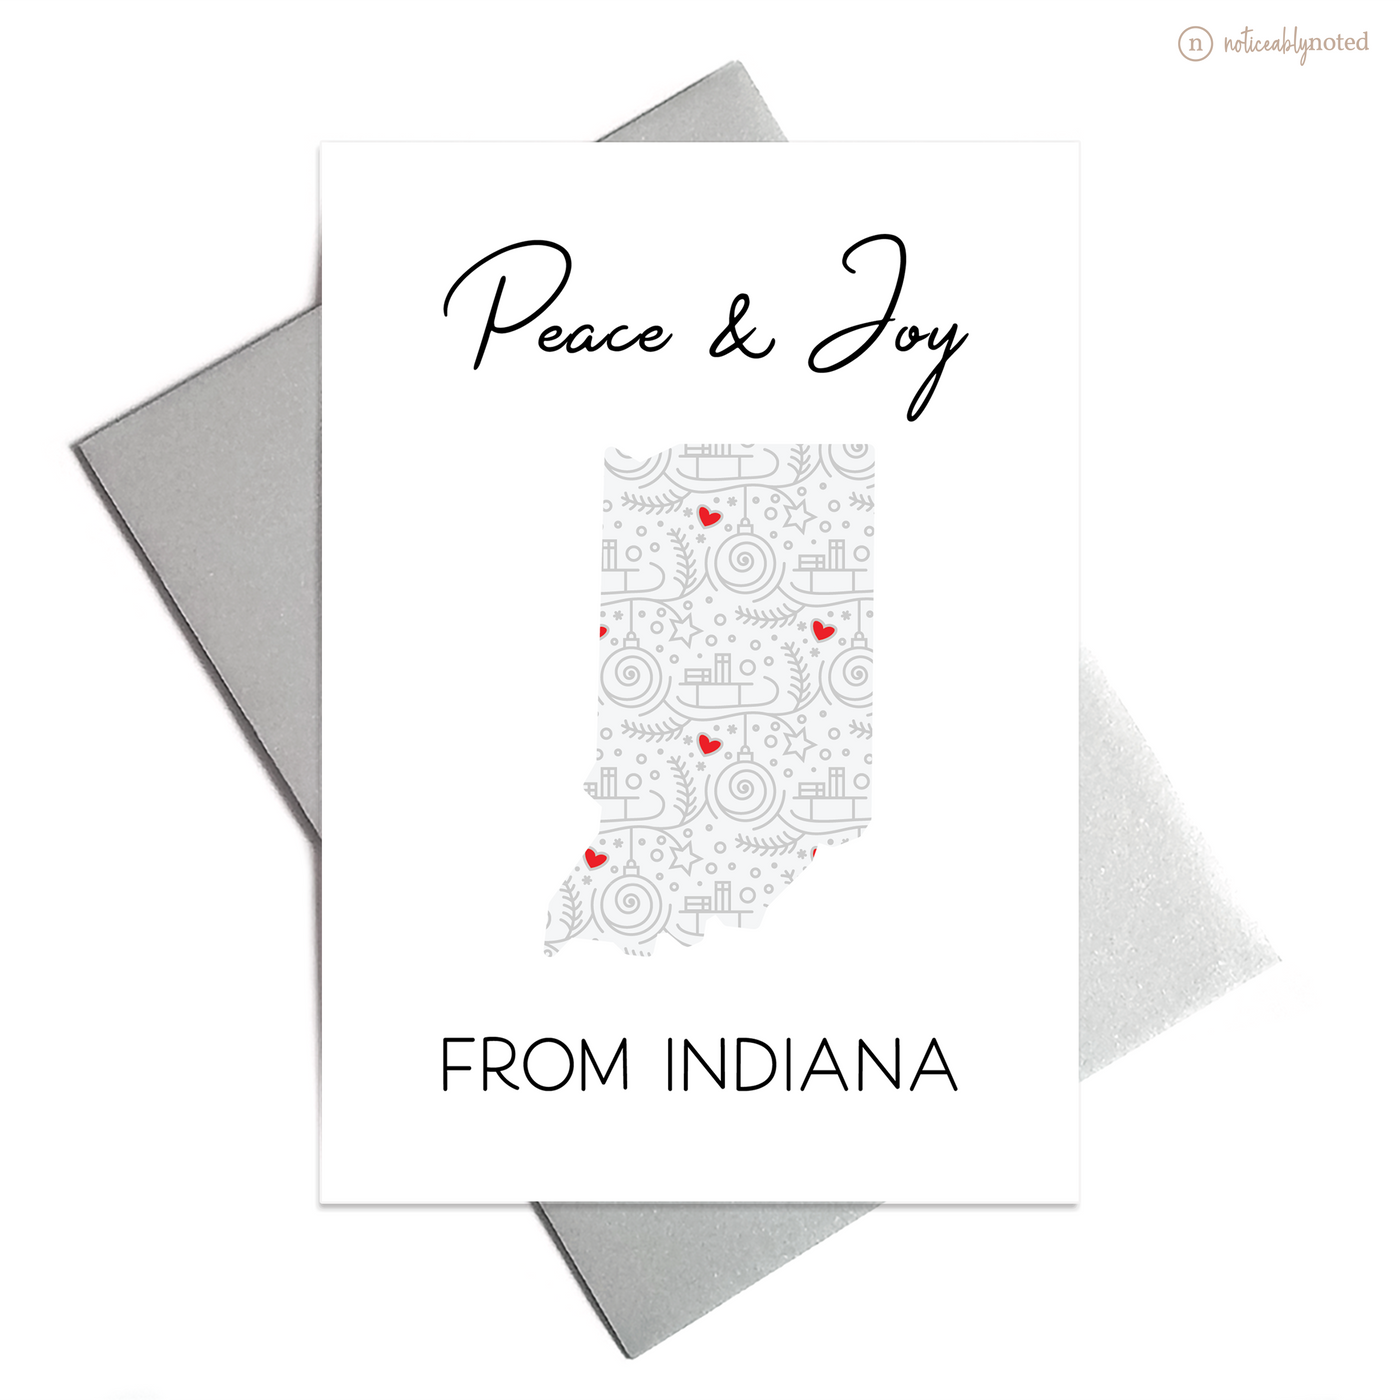 Indiana Holiday Card | Noticeably Noted